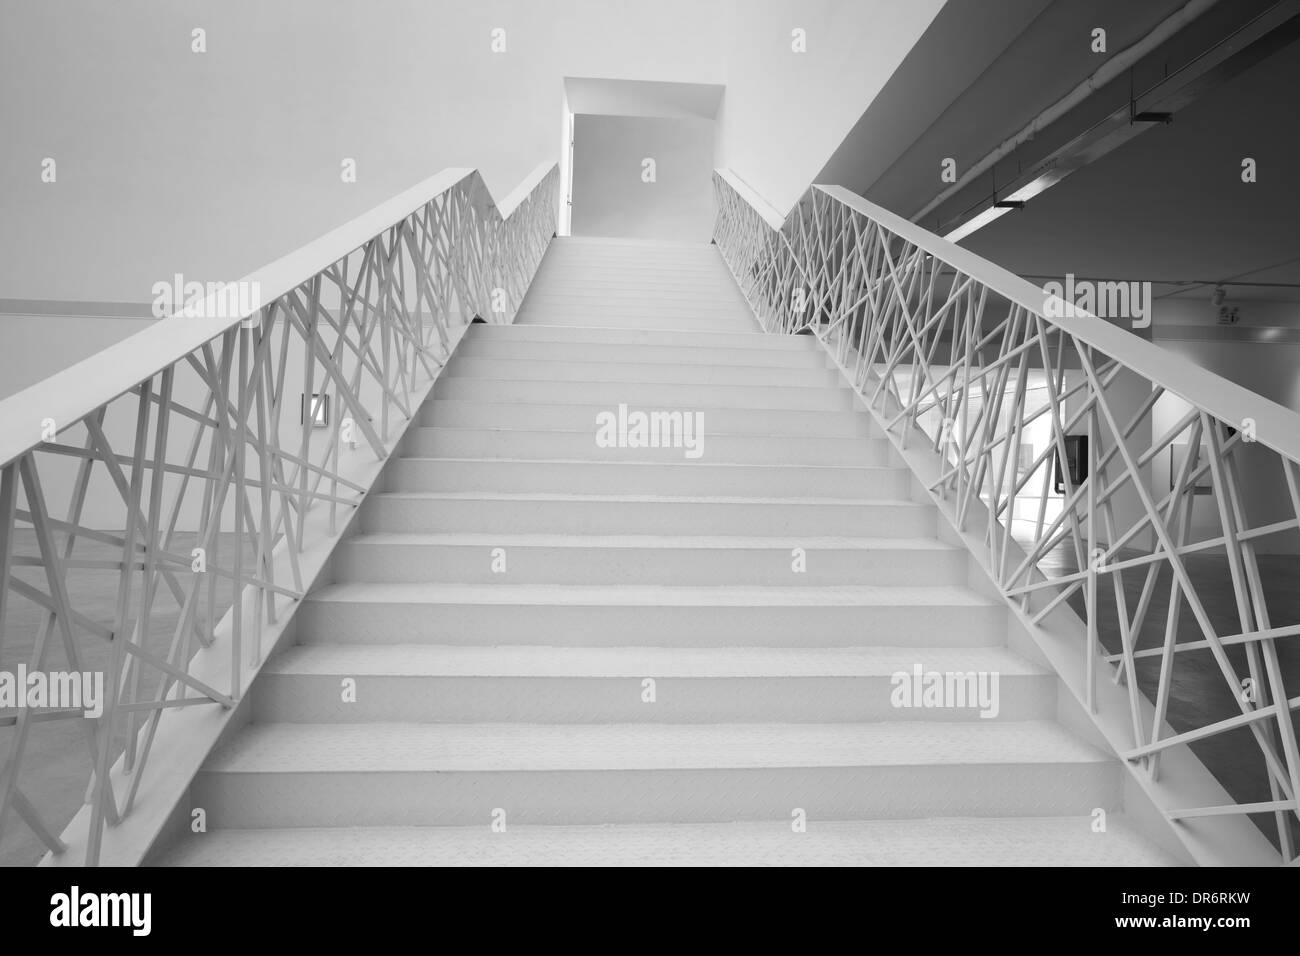 Empty office building stairway composition Stock Photo